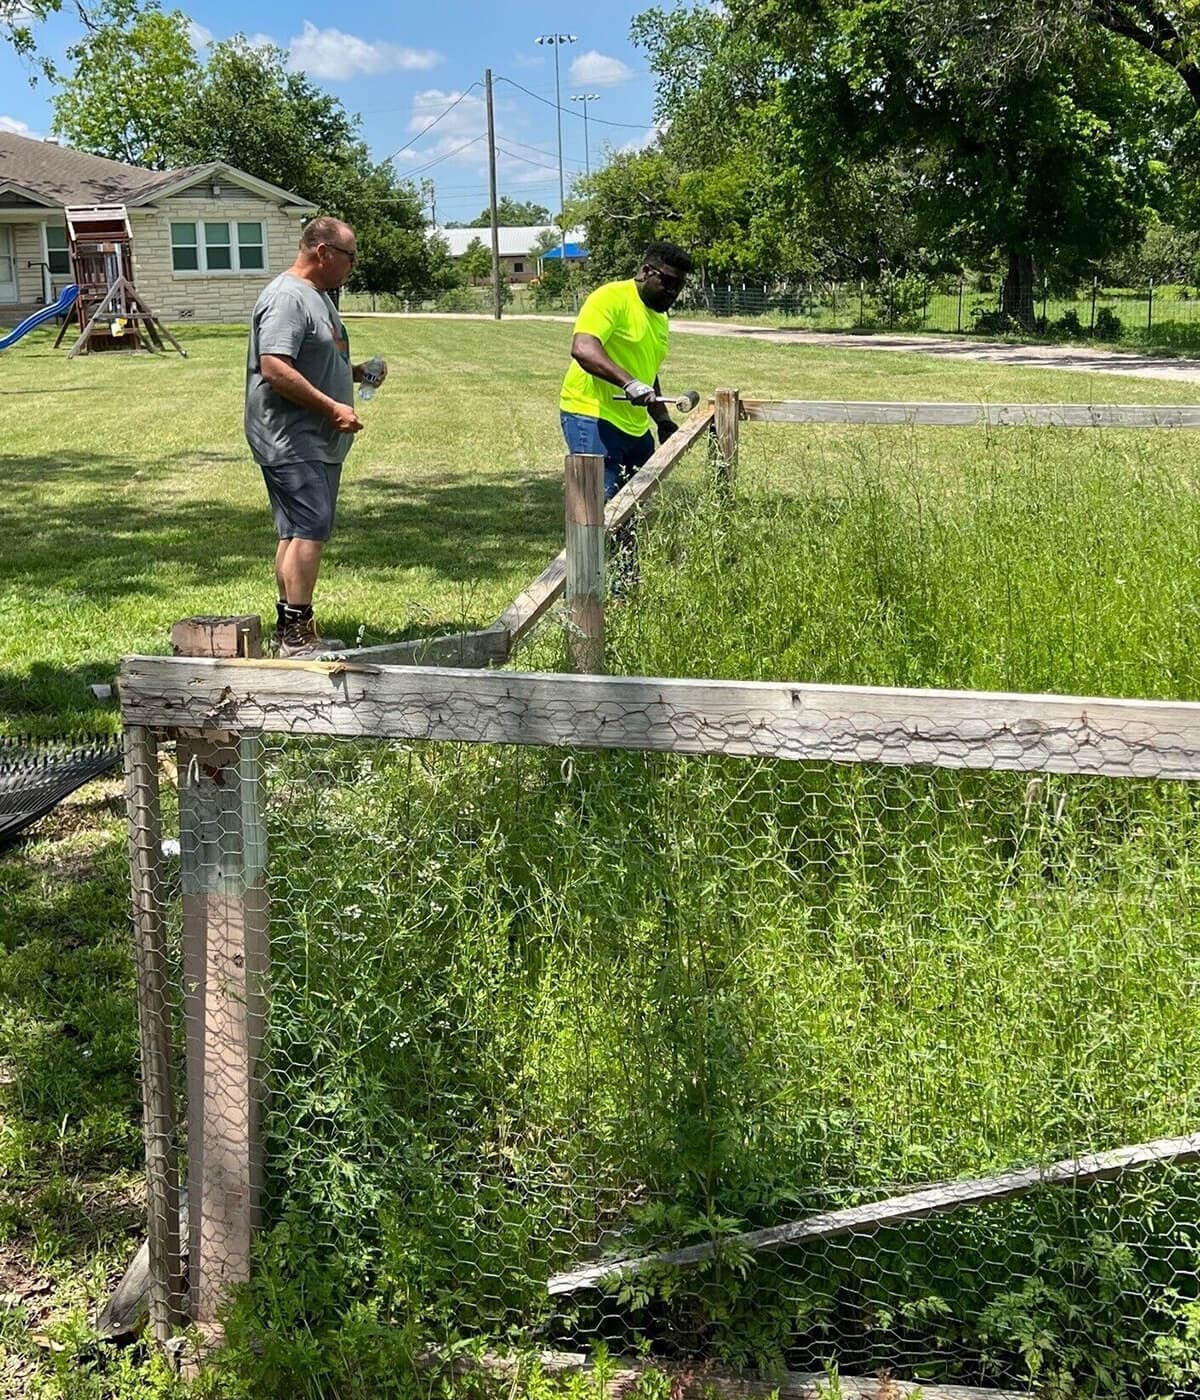 Volunteers taking apart an old fence